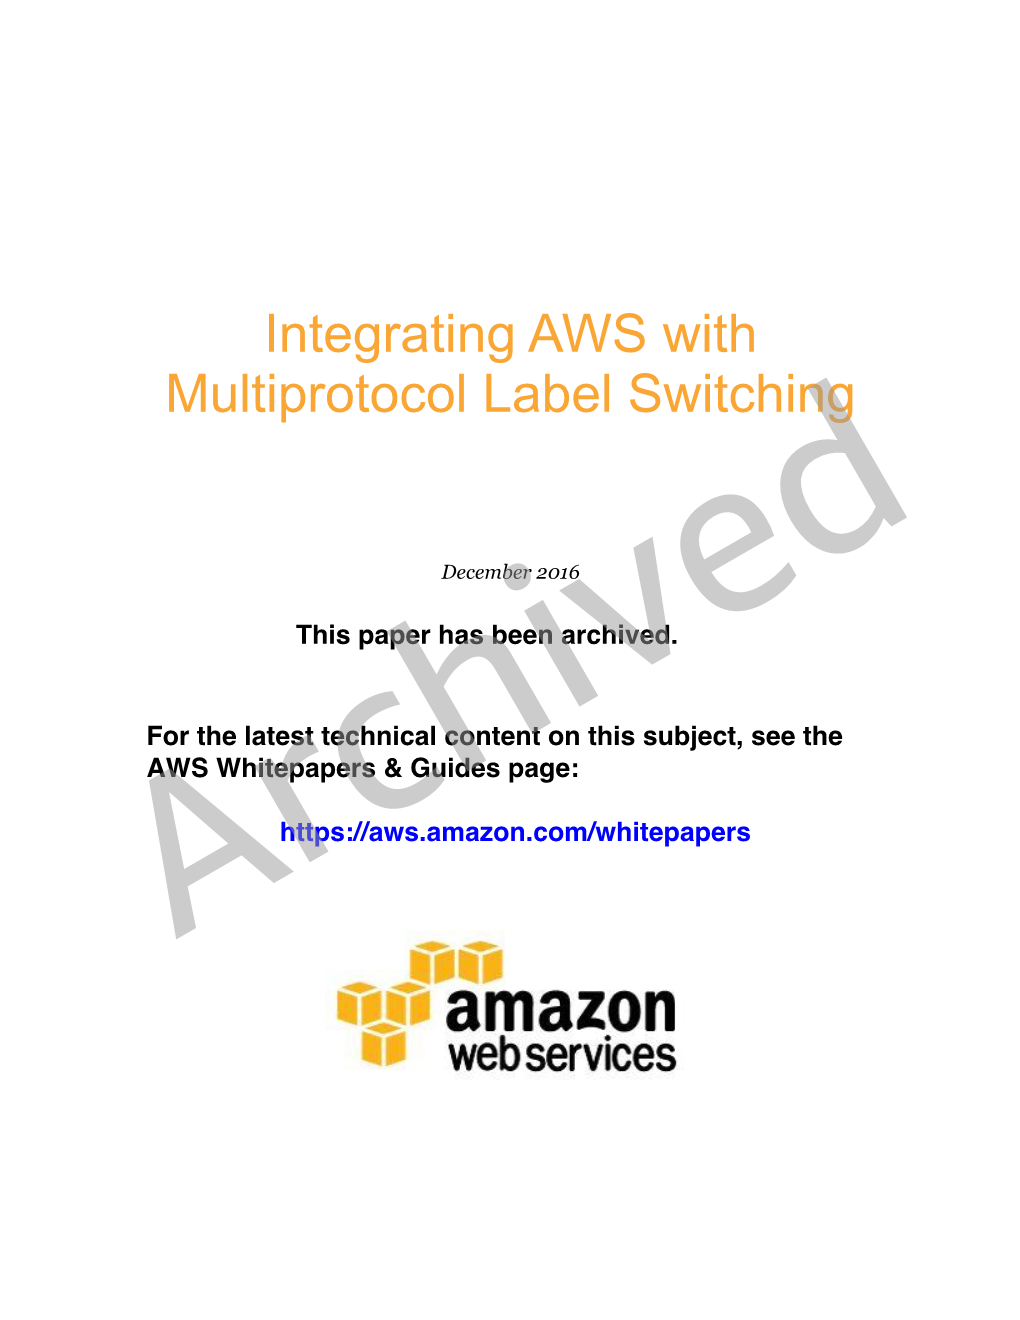 Integrating AWS with Multiprotocol Label Switching